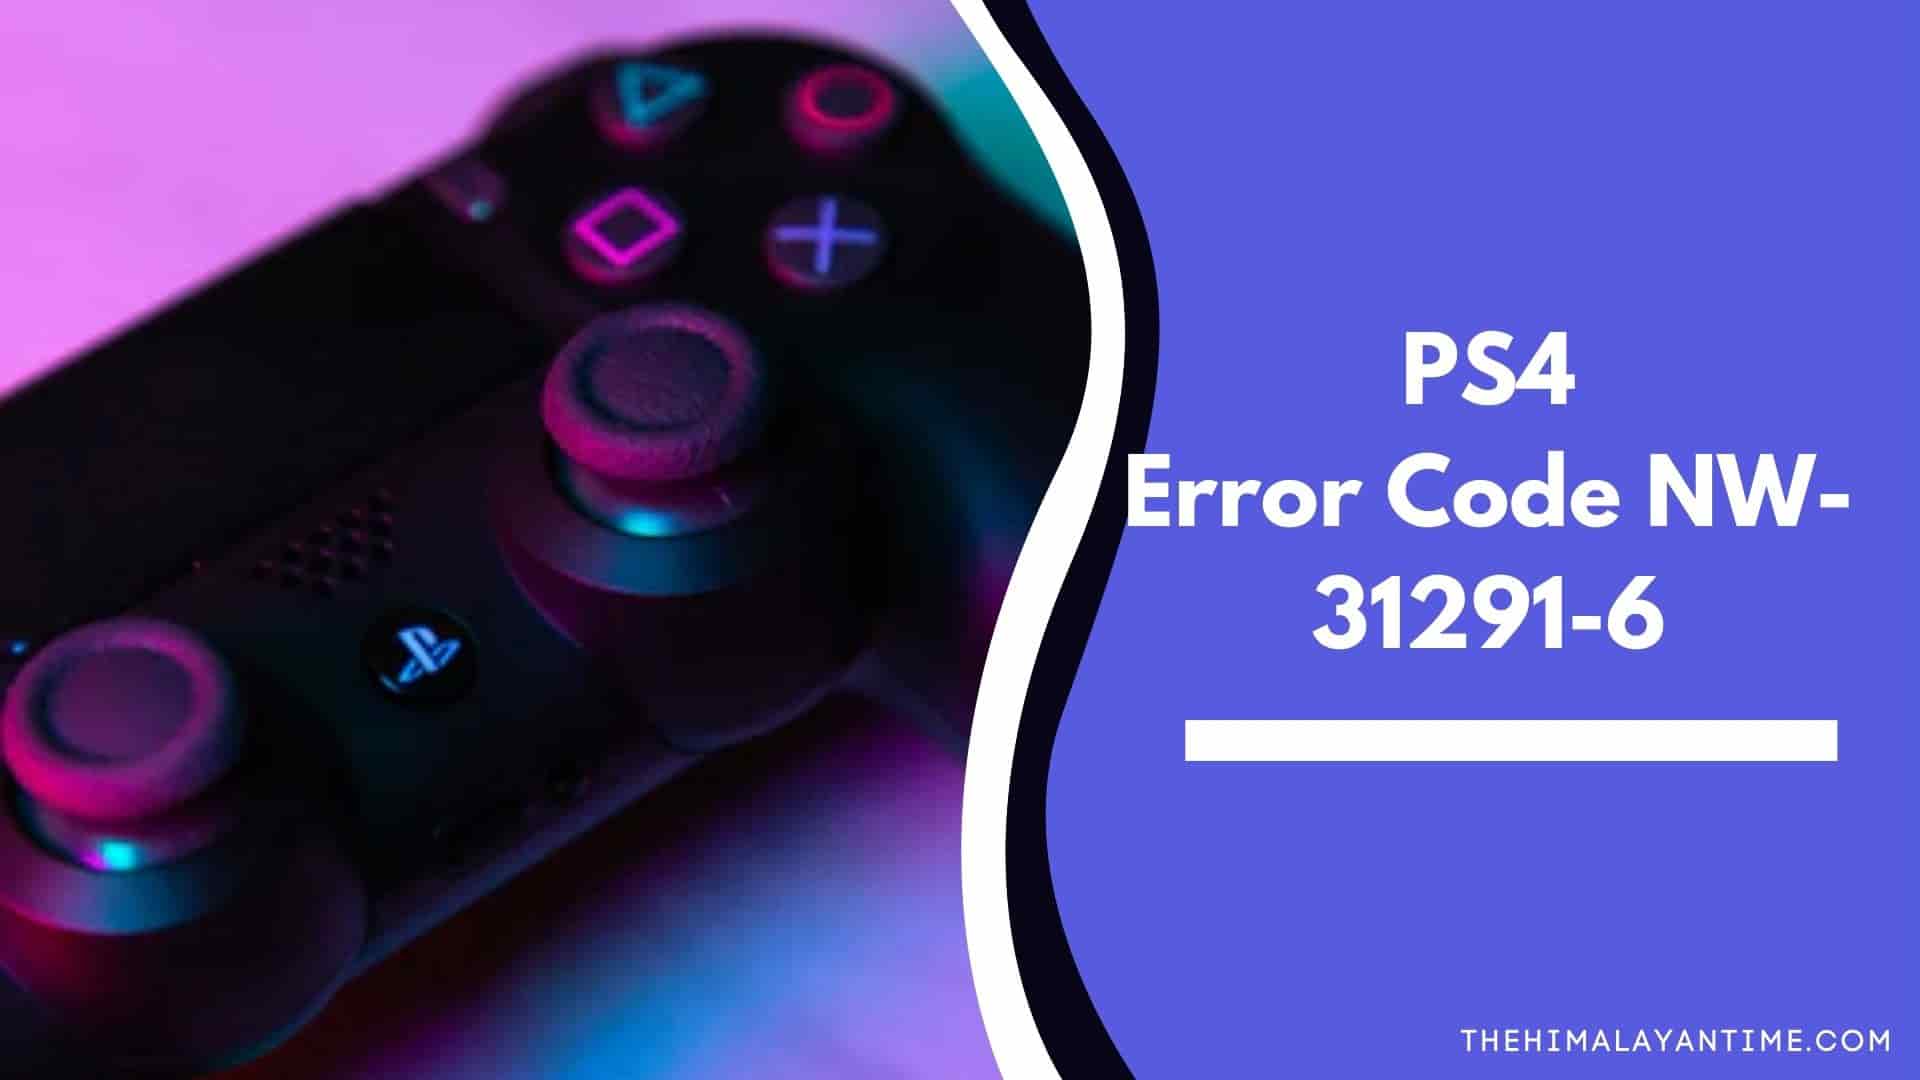 How to Fix PS4 Error Code NW-31291-6